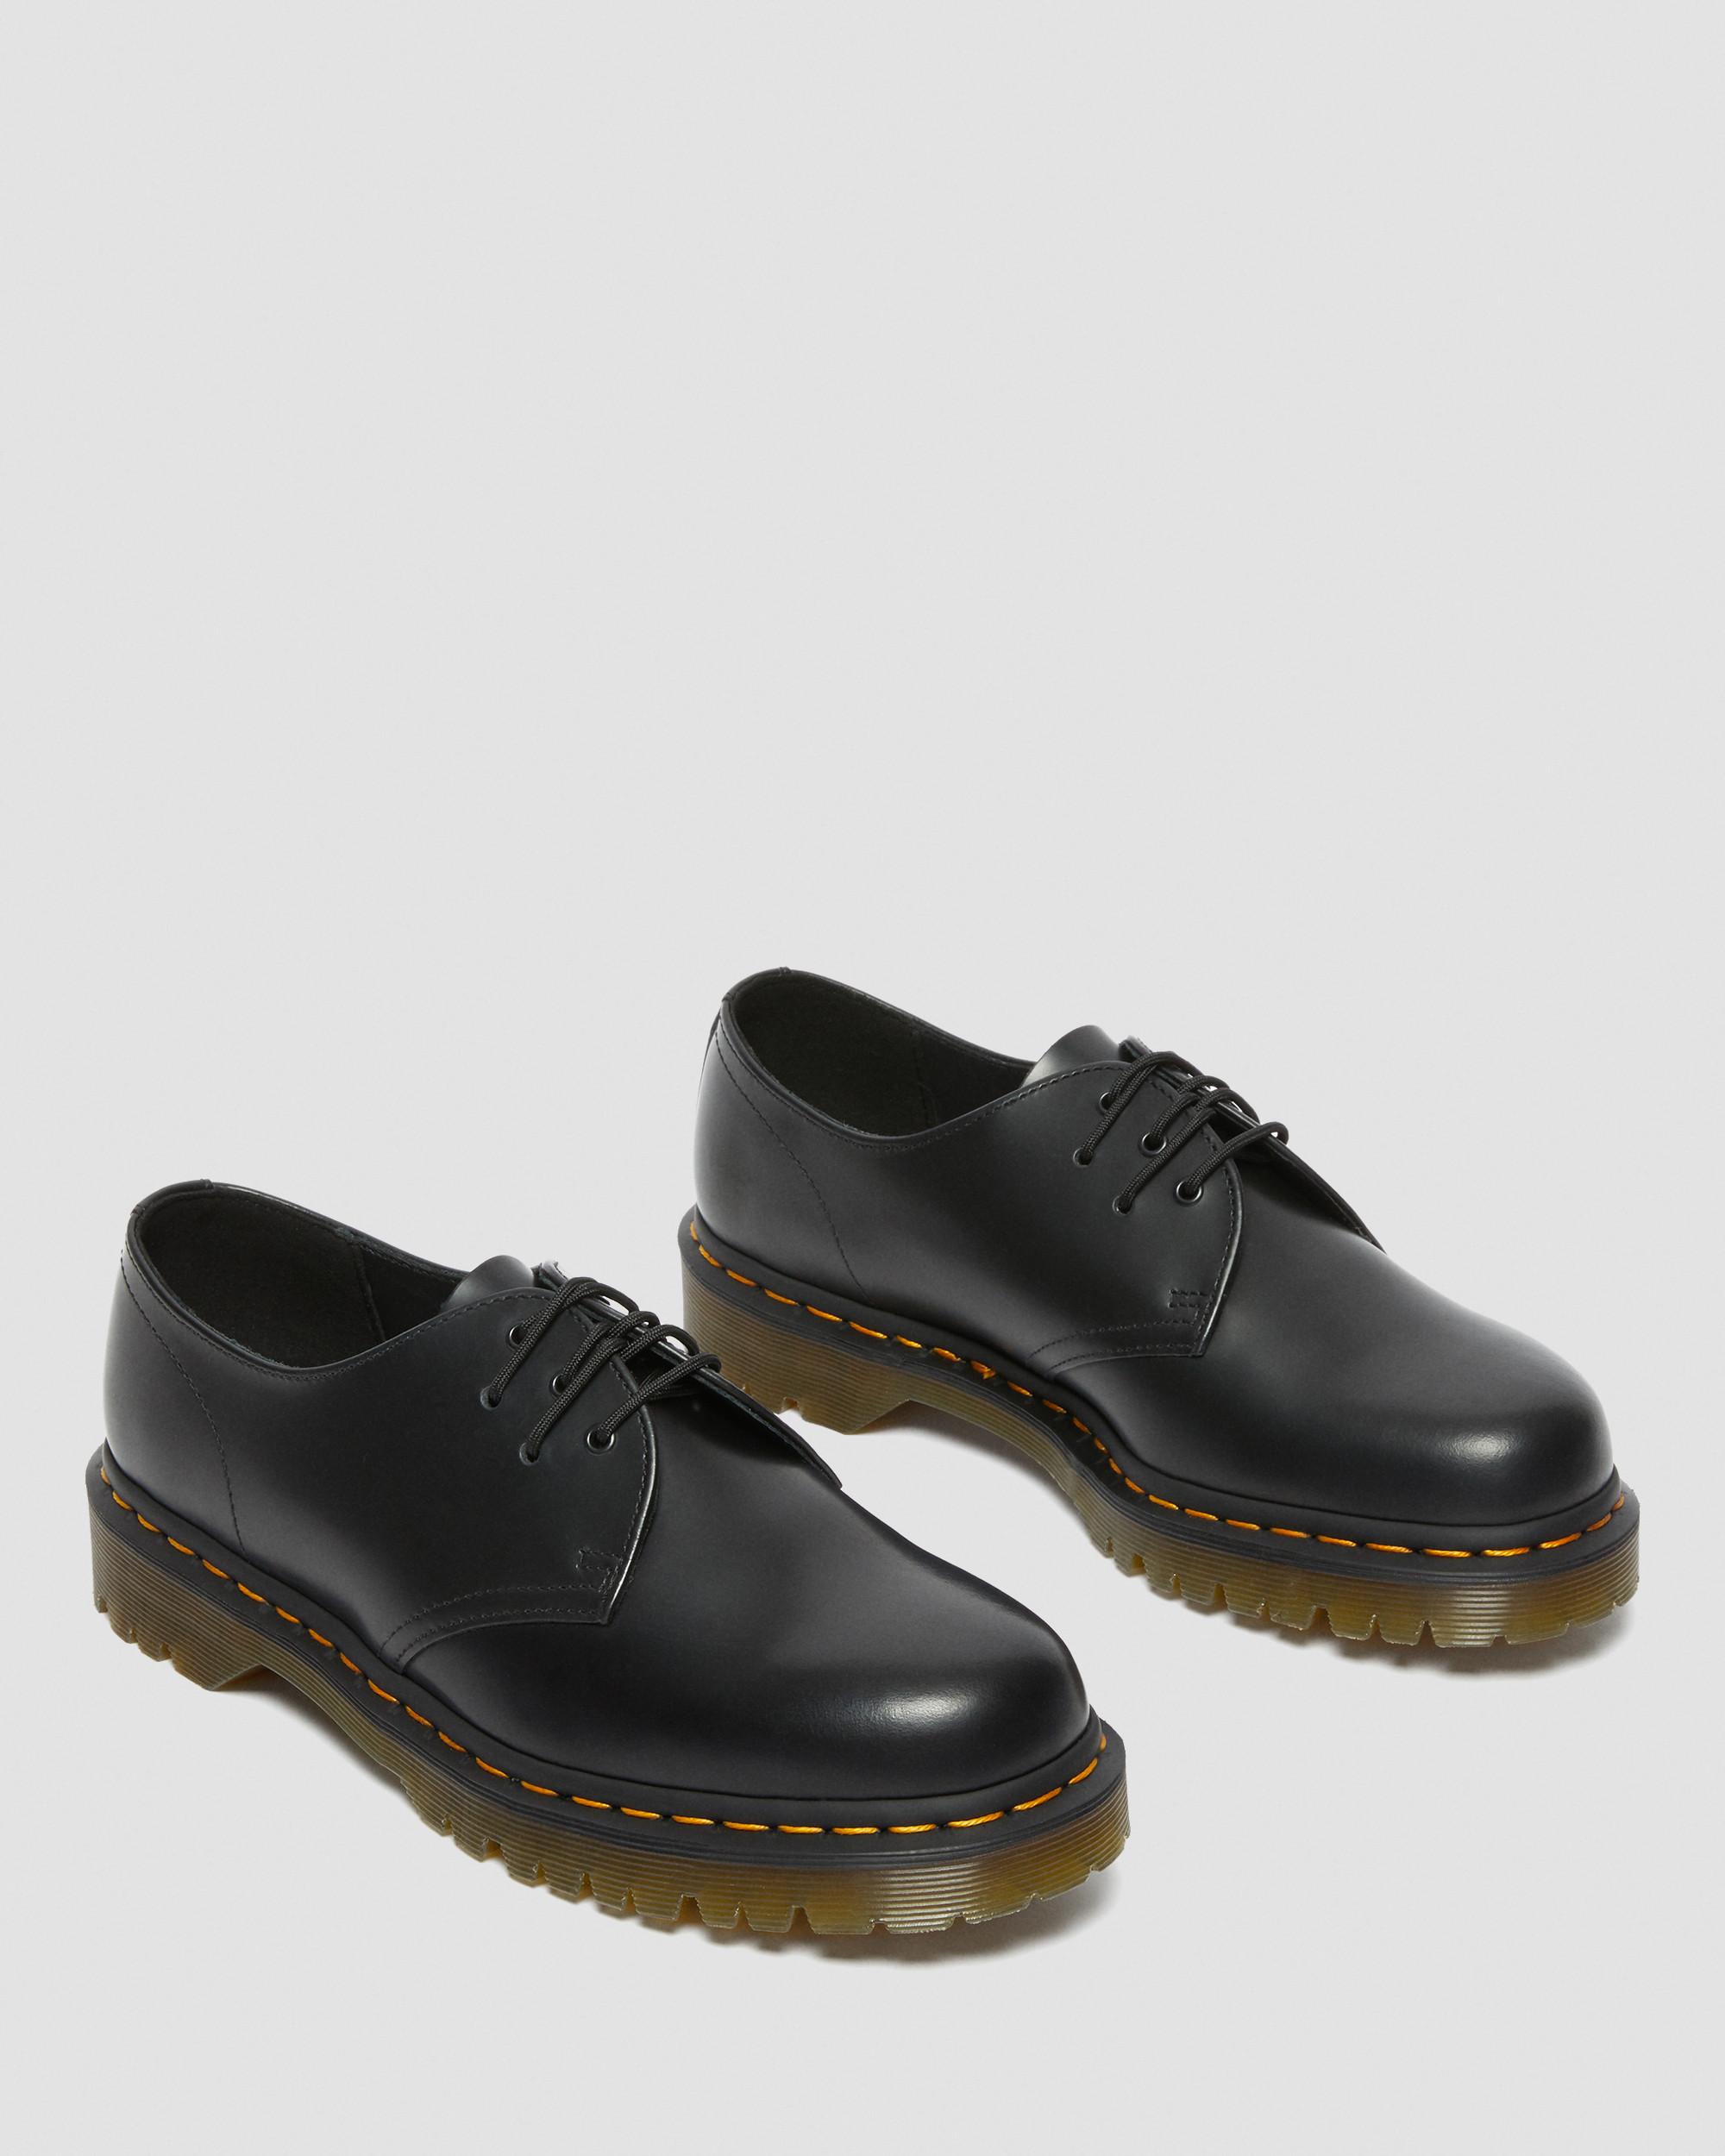 DR MARTENS 1461 Extreme Lace Leather Oxford Shoes